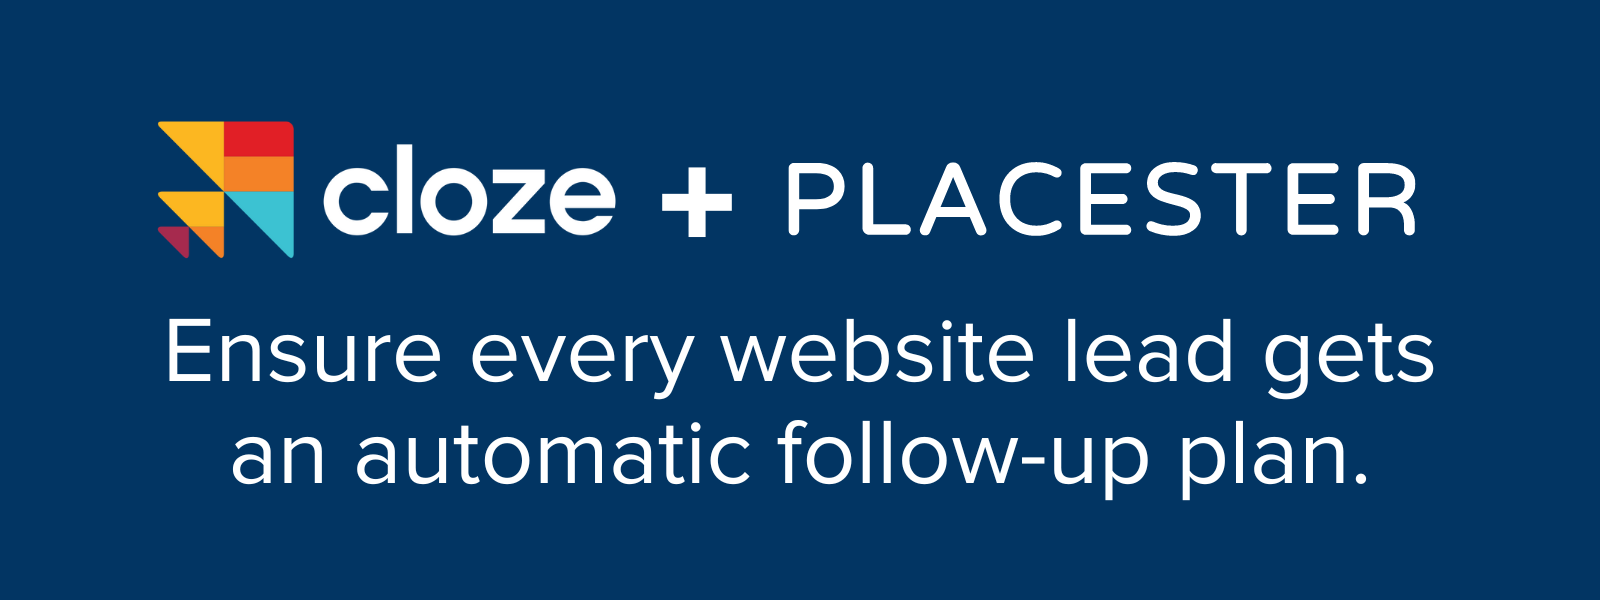 Cloze and Placester: Ensure every website lead gets an automatic follow-up plan.